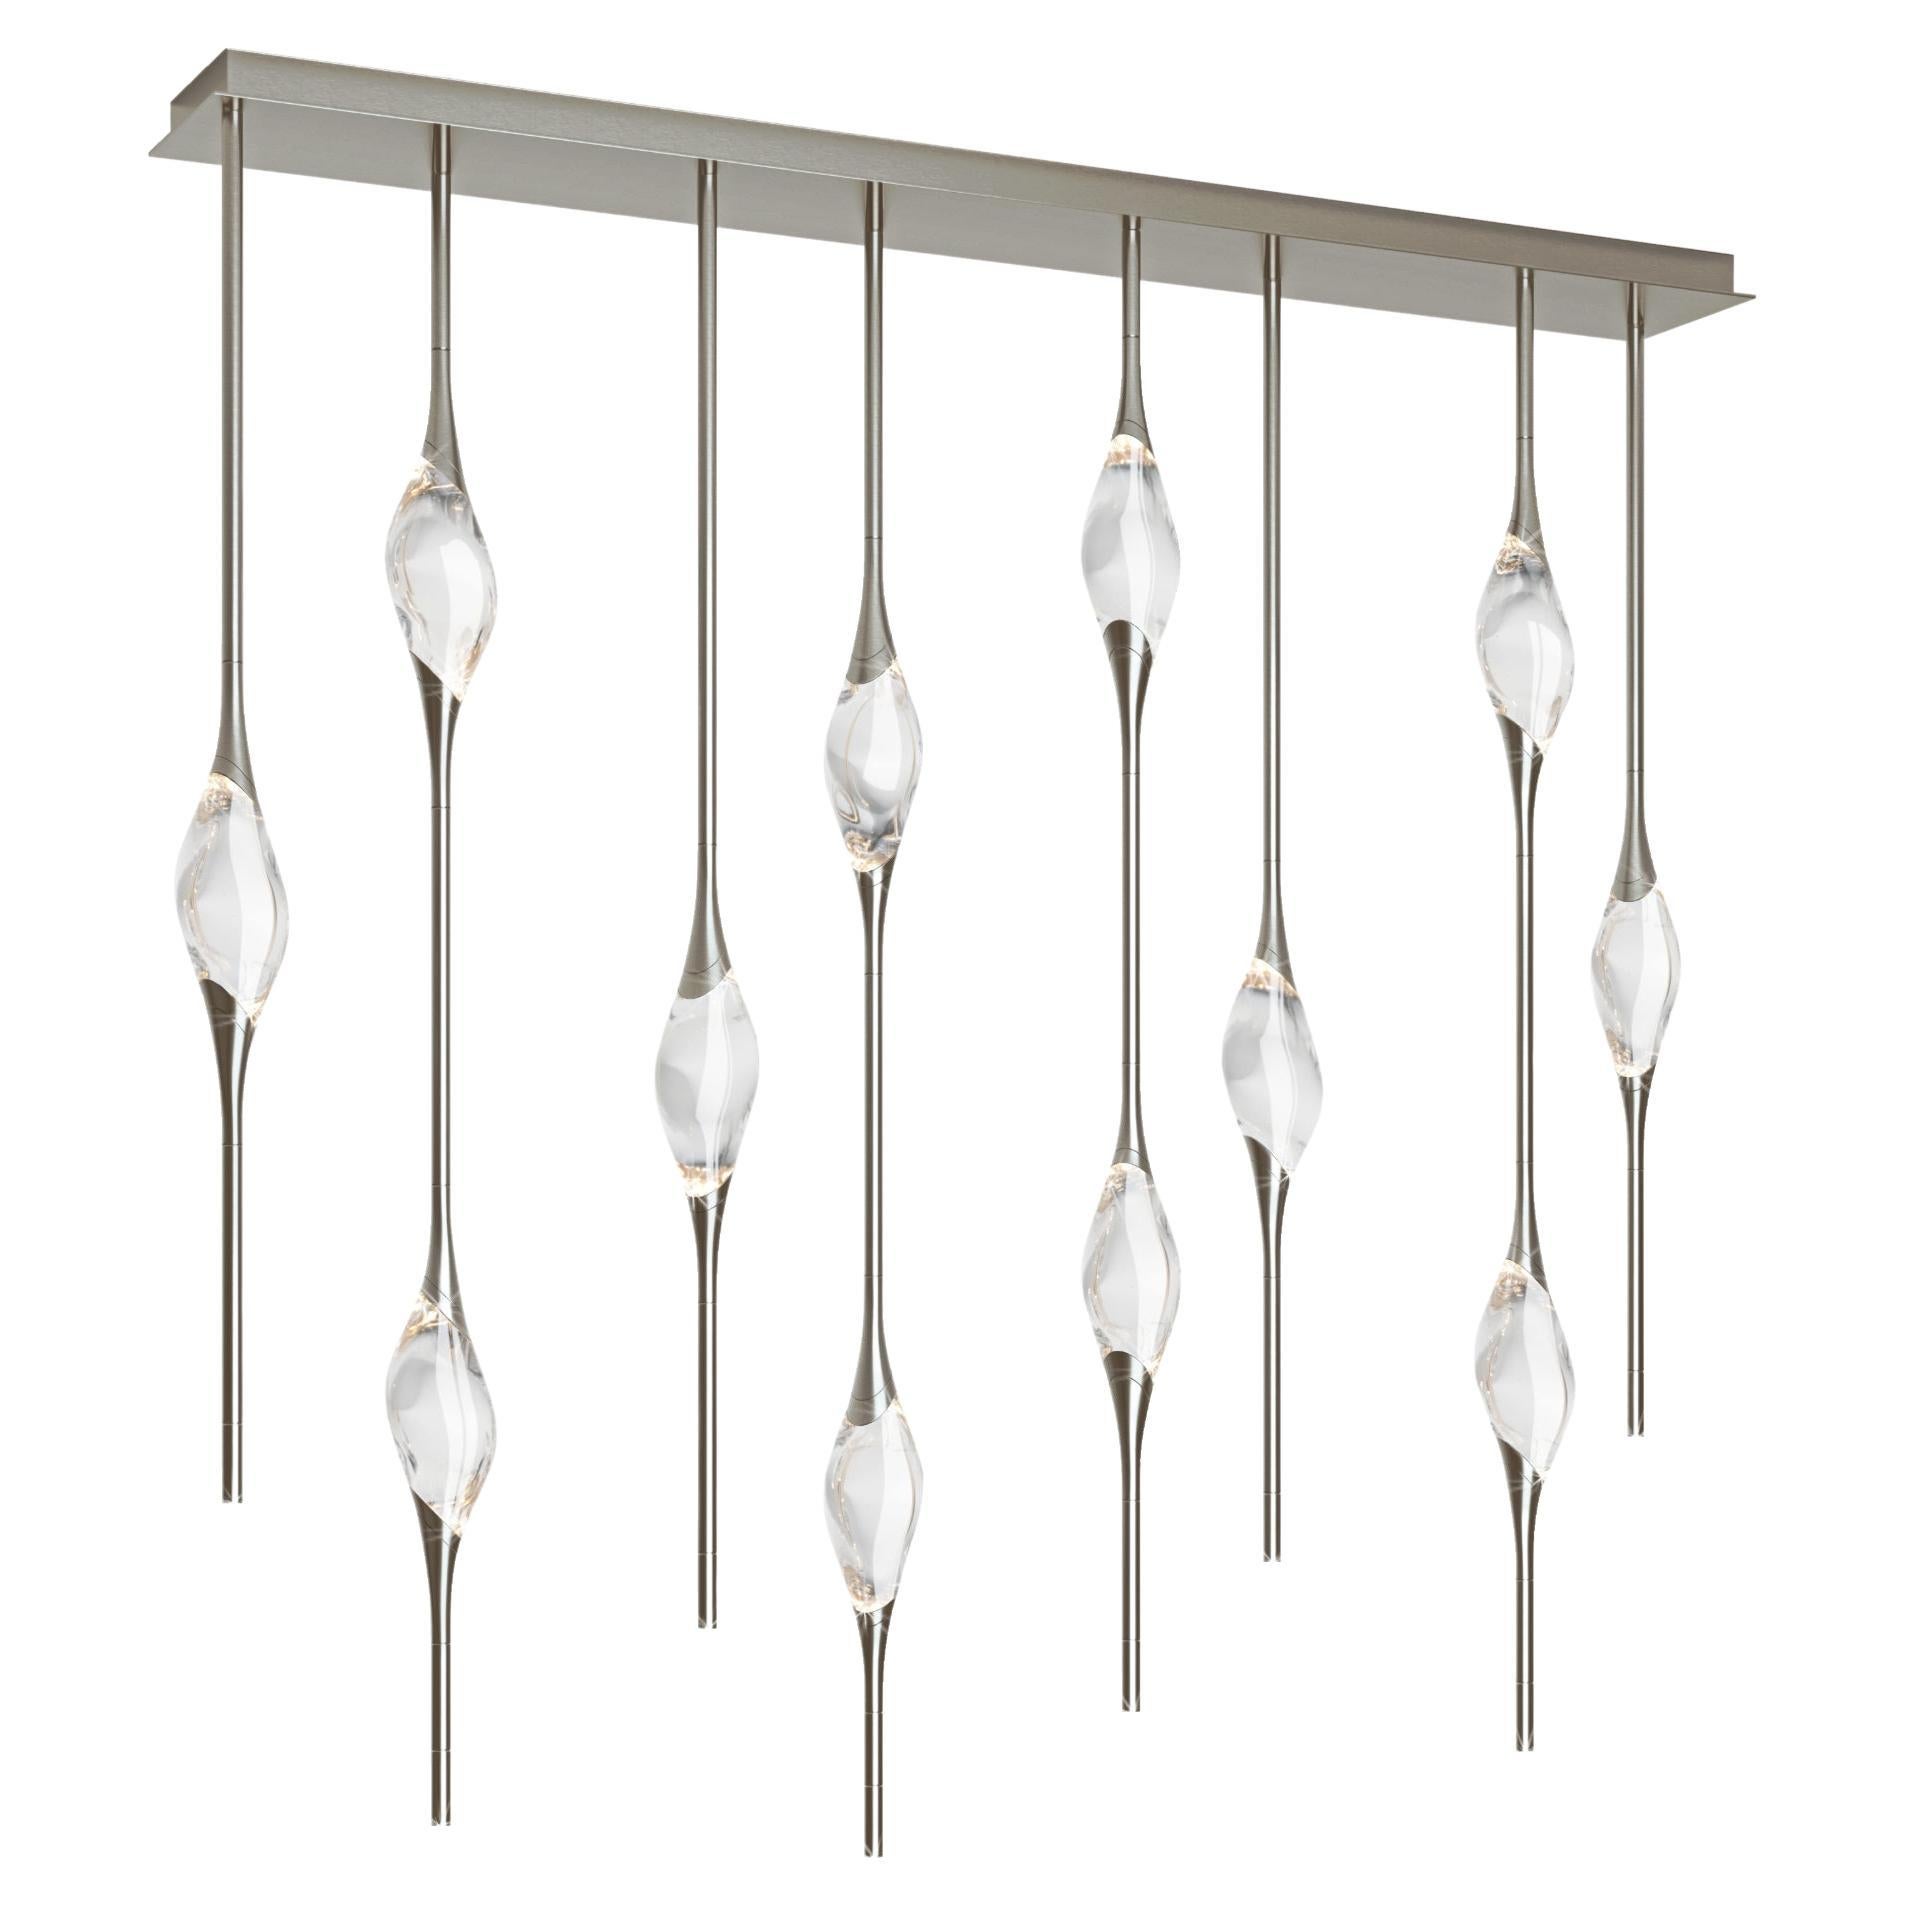 "Il Pezzo 12 Staggered Chandelier" - length 150cm/59” - nickel - crystal - LEDs For Sale